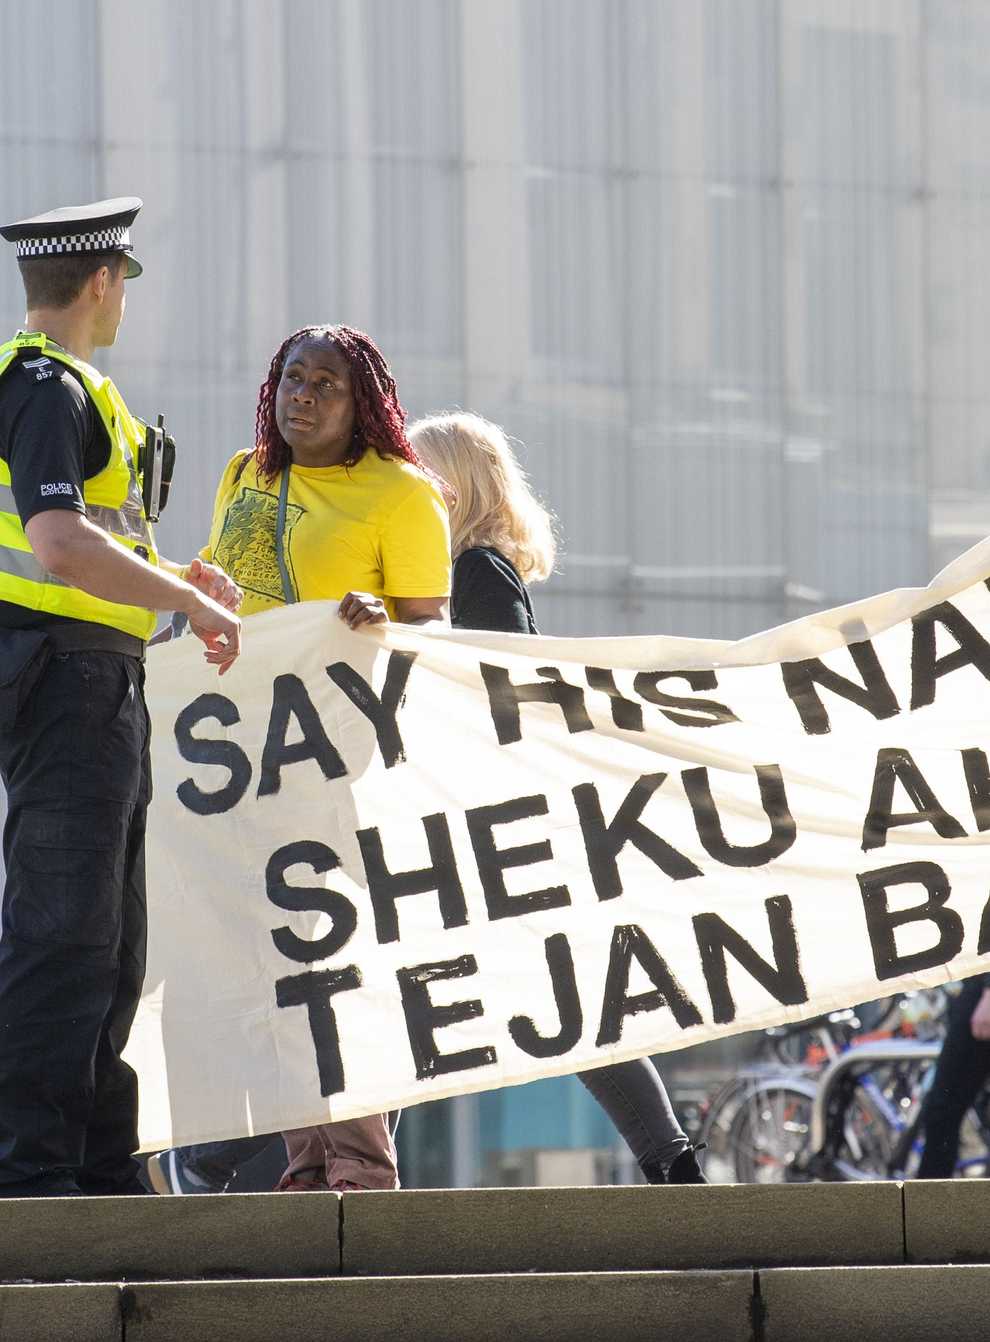 The the public inquiry into the death of Sheku Bayoh, who died in May 2015 after he was restrained by officers responding to a call in Kirkcaldy, Fife, continues (Lesley Martin/PA)